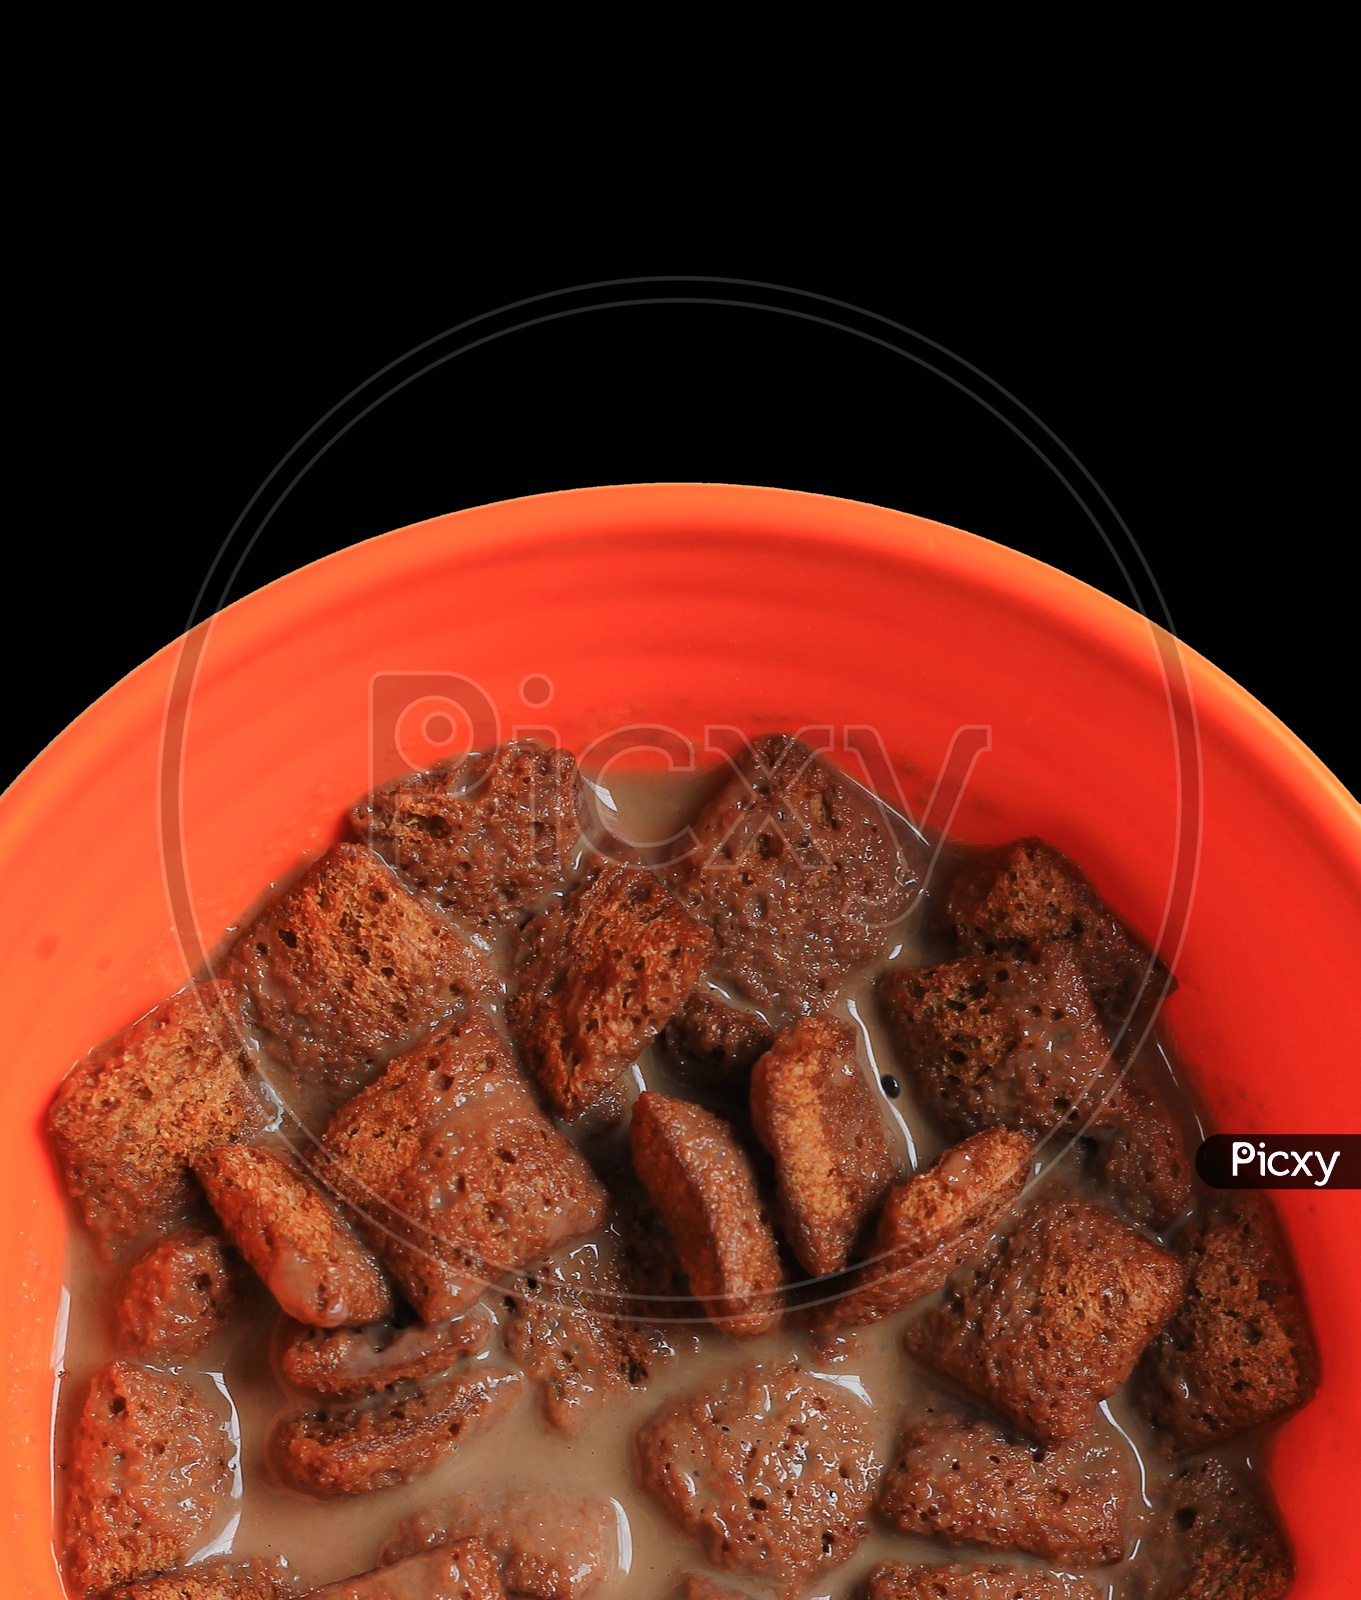 Close Up Photo Of Chocolate Cornflakes Dipped In Chocolate Milk In Black Background